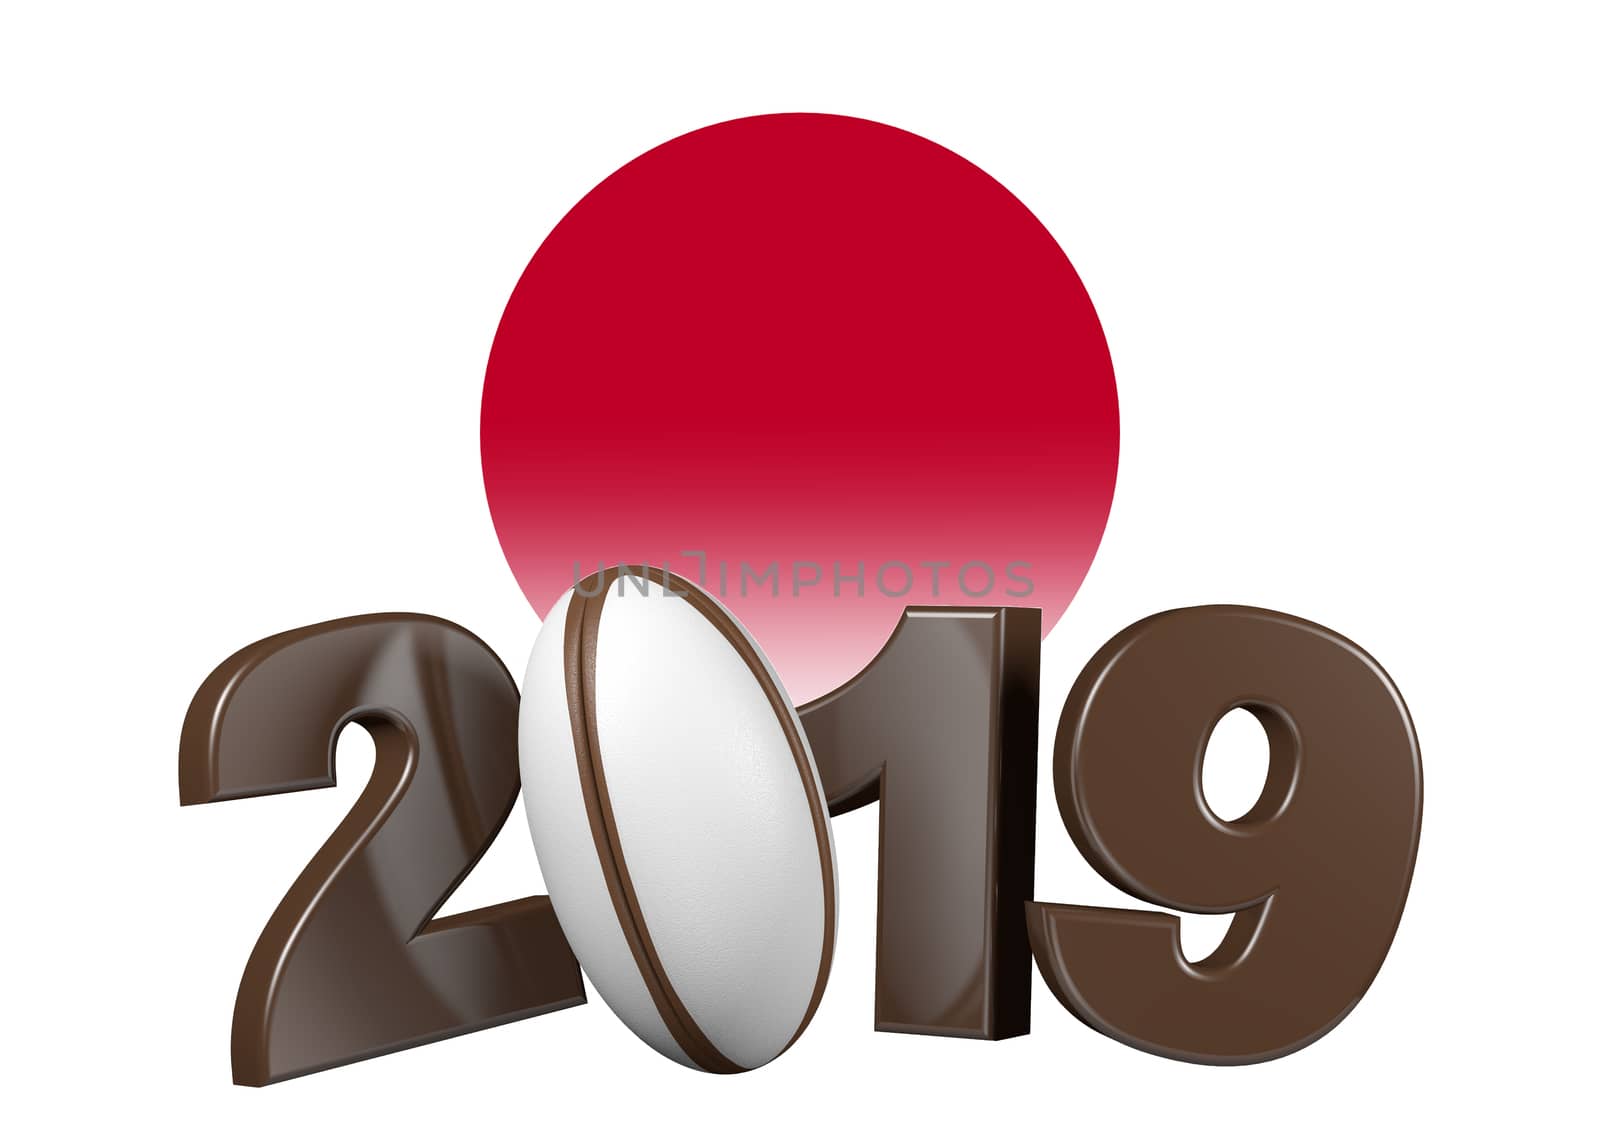 Rugby 2019 design with Japan Flag by shkyo30